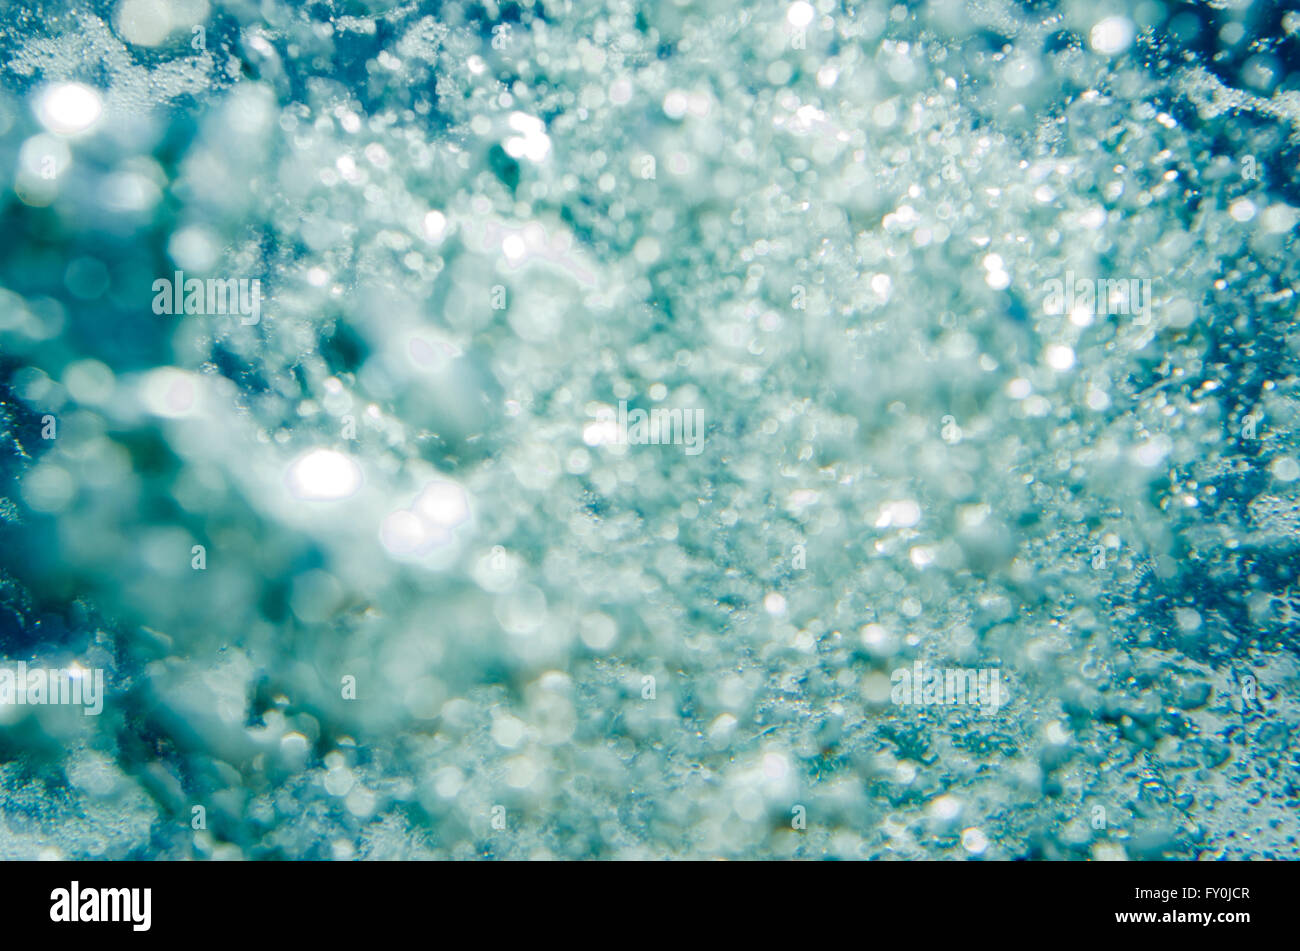 Out of focus abstract background of bubbles underwater Stock Photo